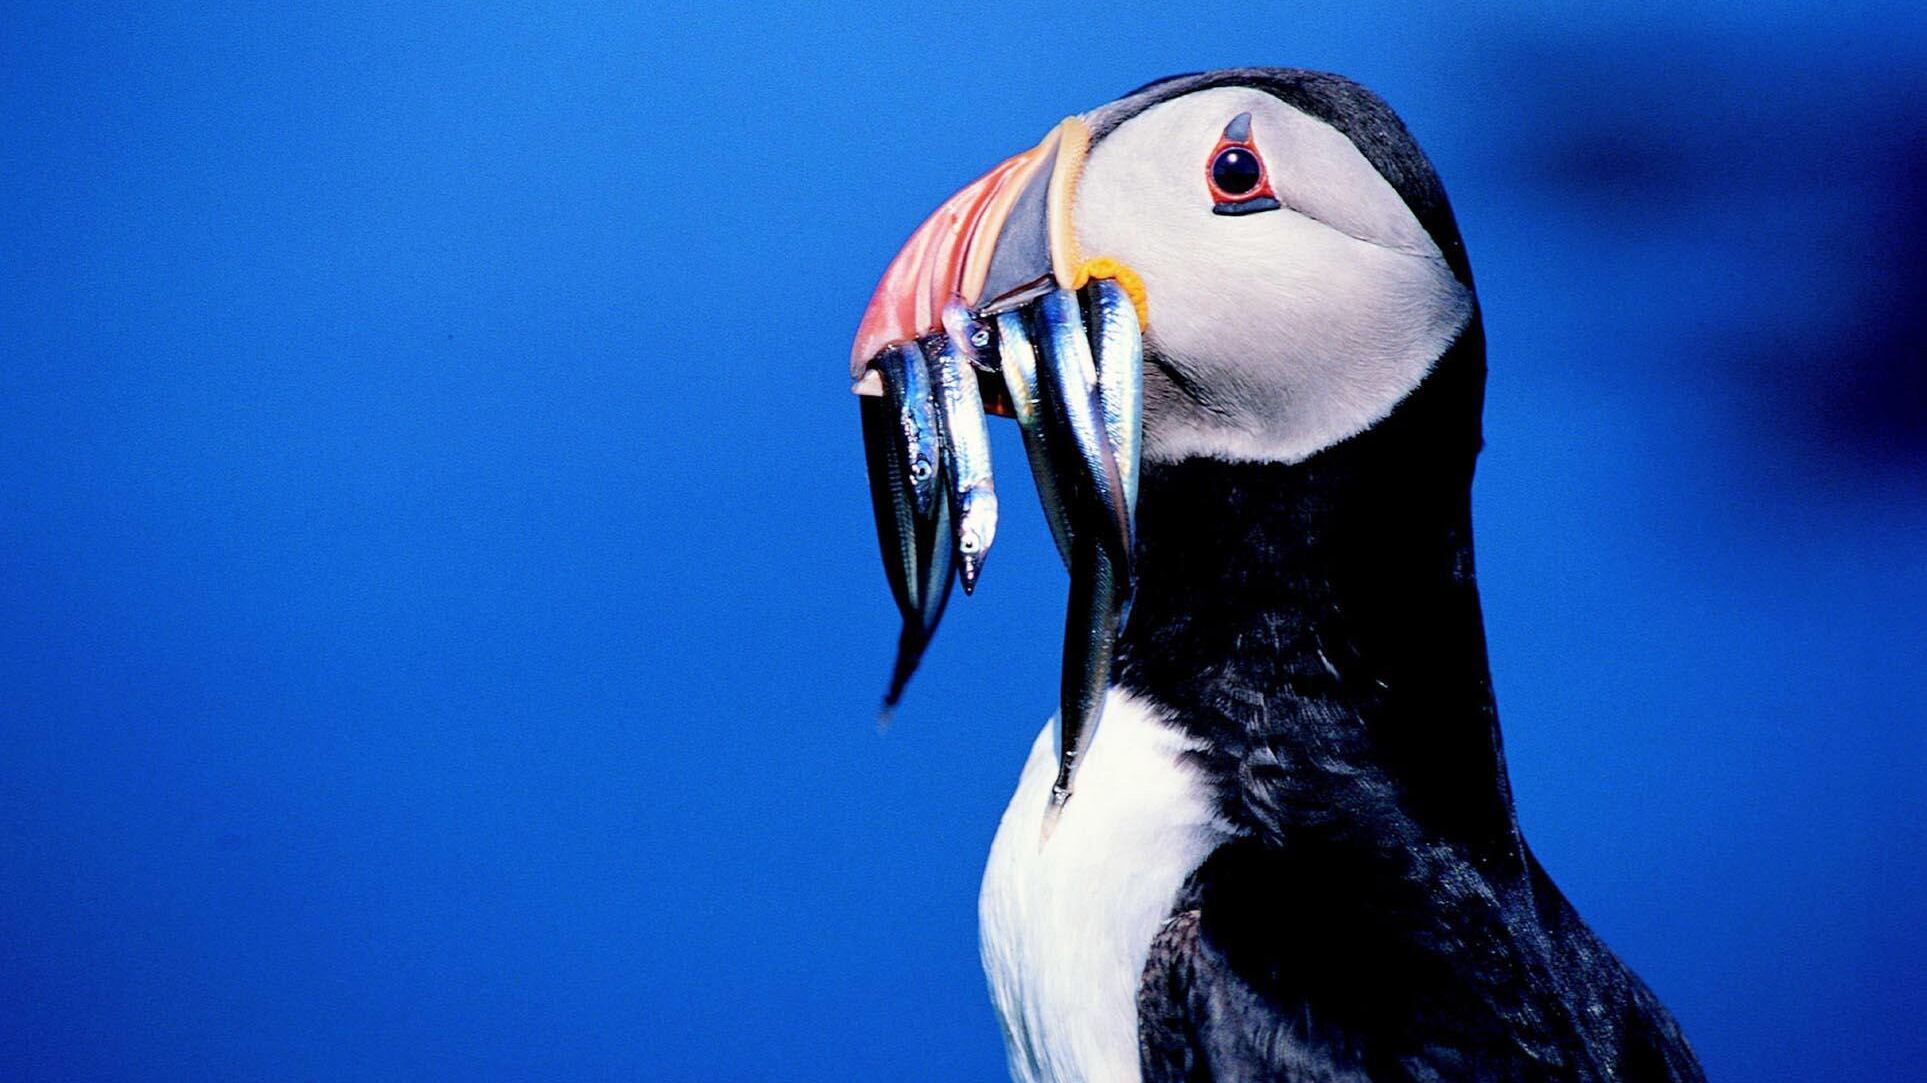 The Government is being urged to ‘stand strong’ on moves to close a fishery in UK waters to protect puffins and other wildlife in the face of EU opposition